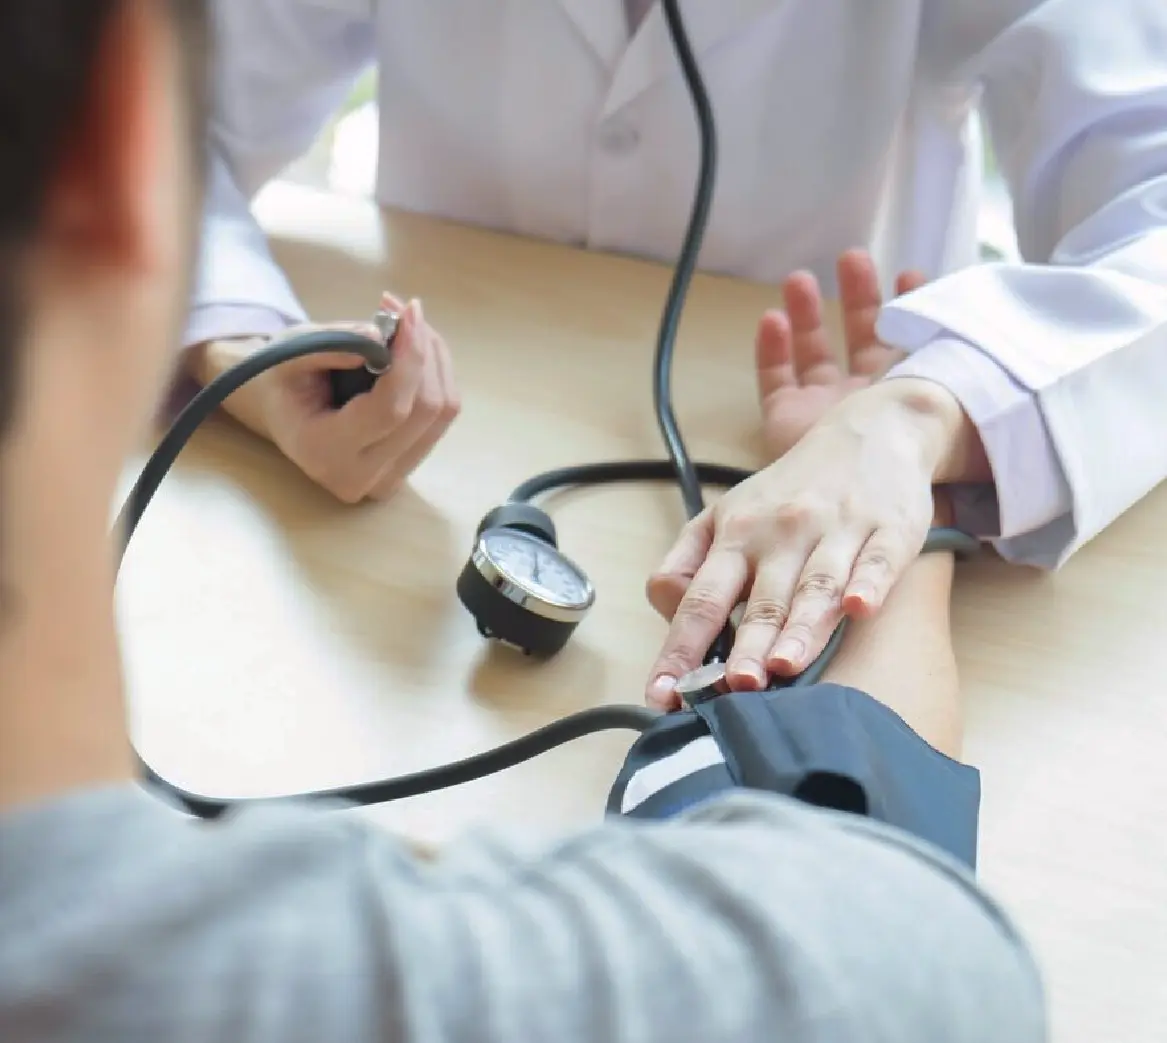 This is an image of a GP checking the patient's blood pressure.